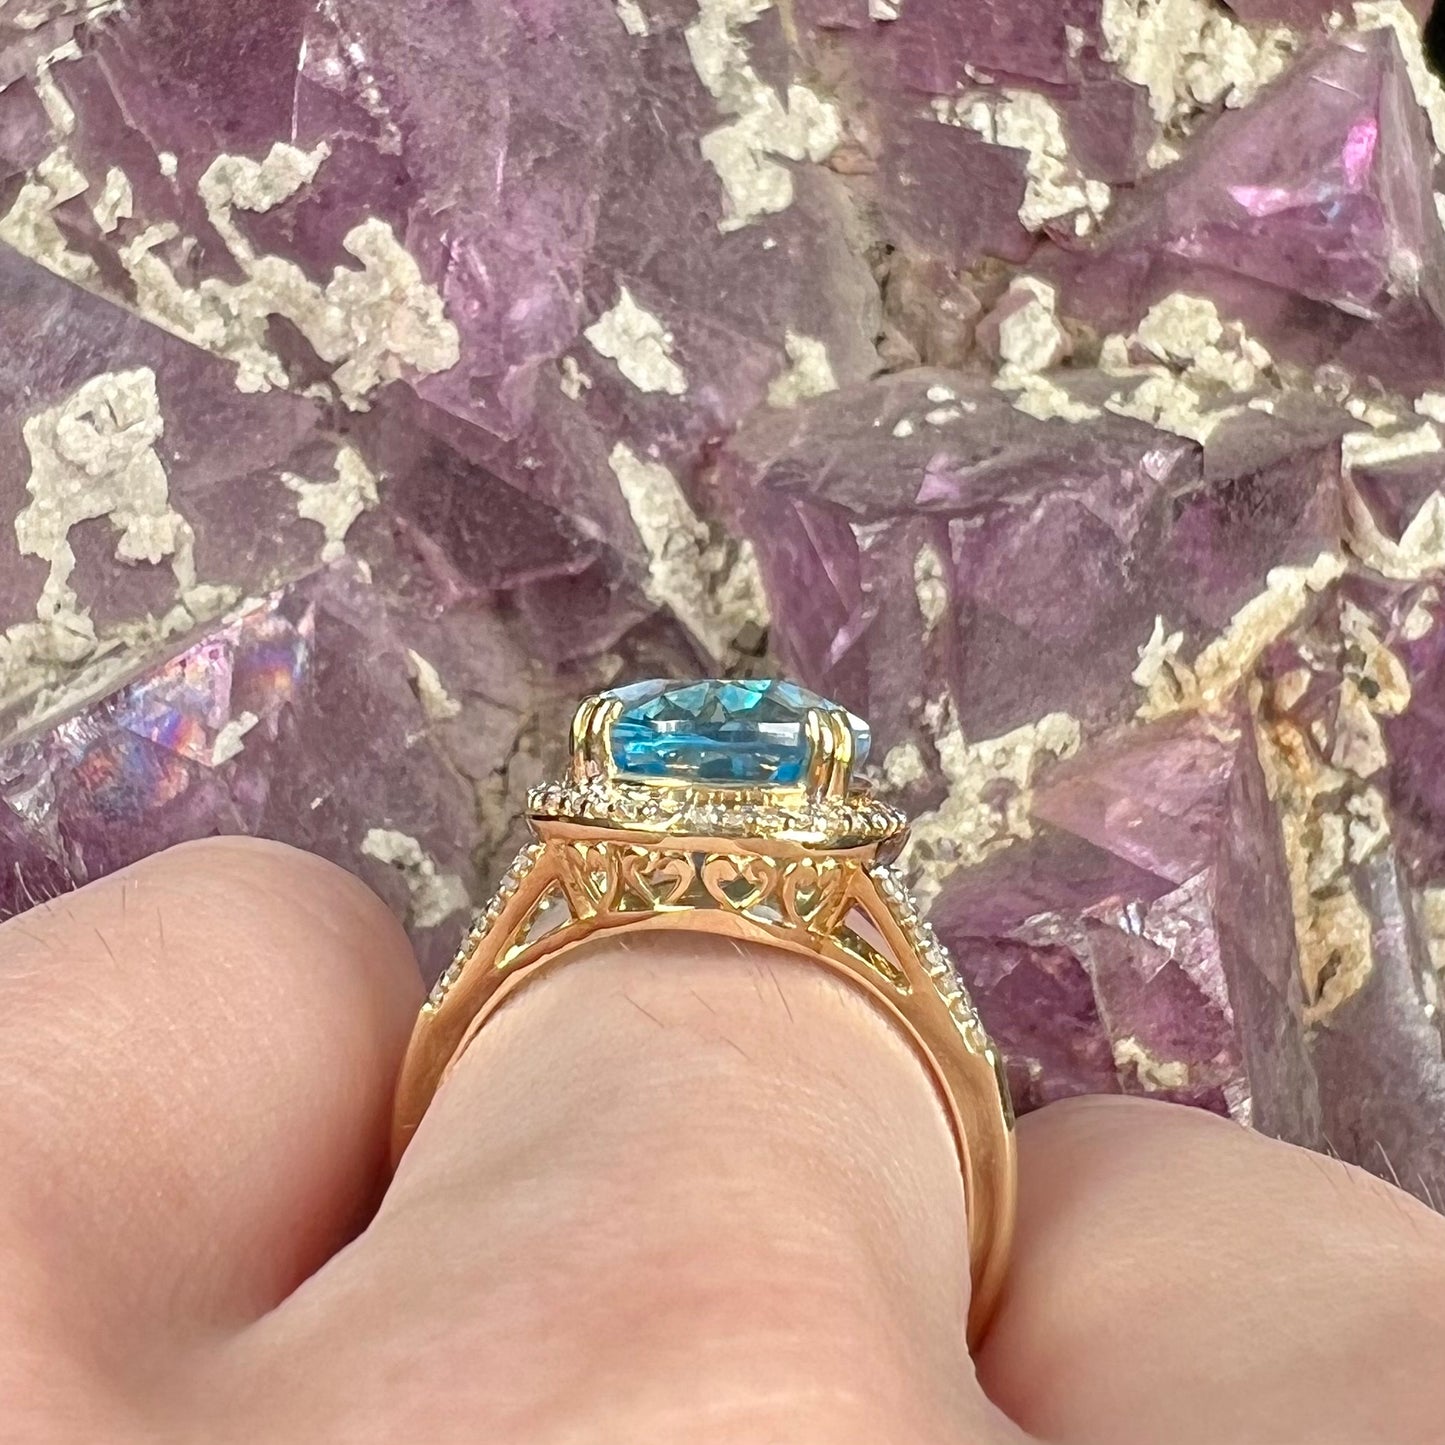 An oval cut Swiss blue topaz and diamond pave split shank ring in yellow gold.